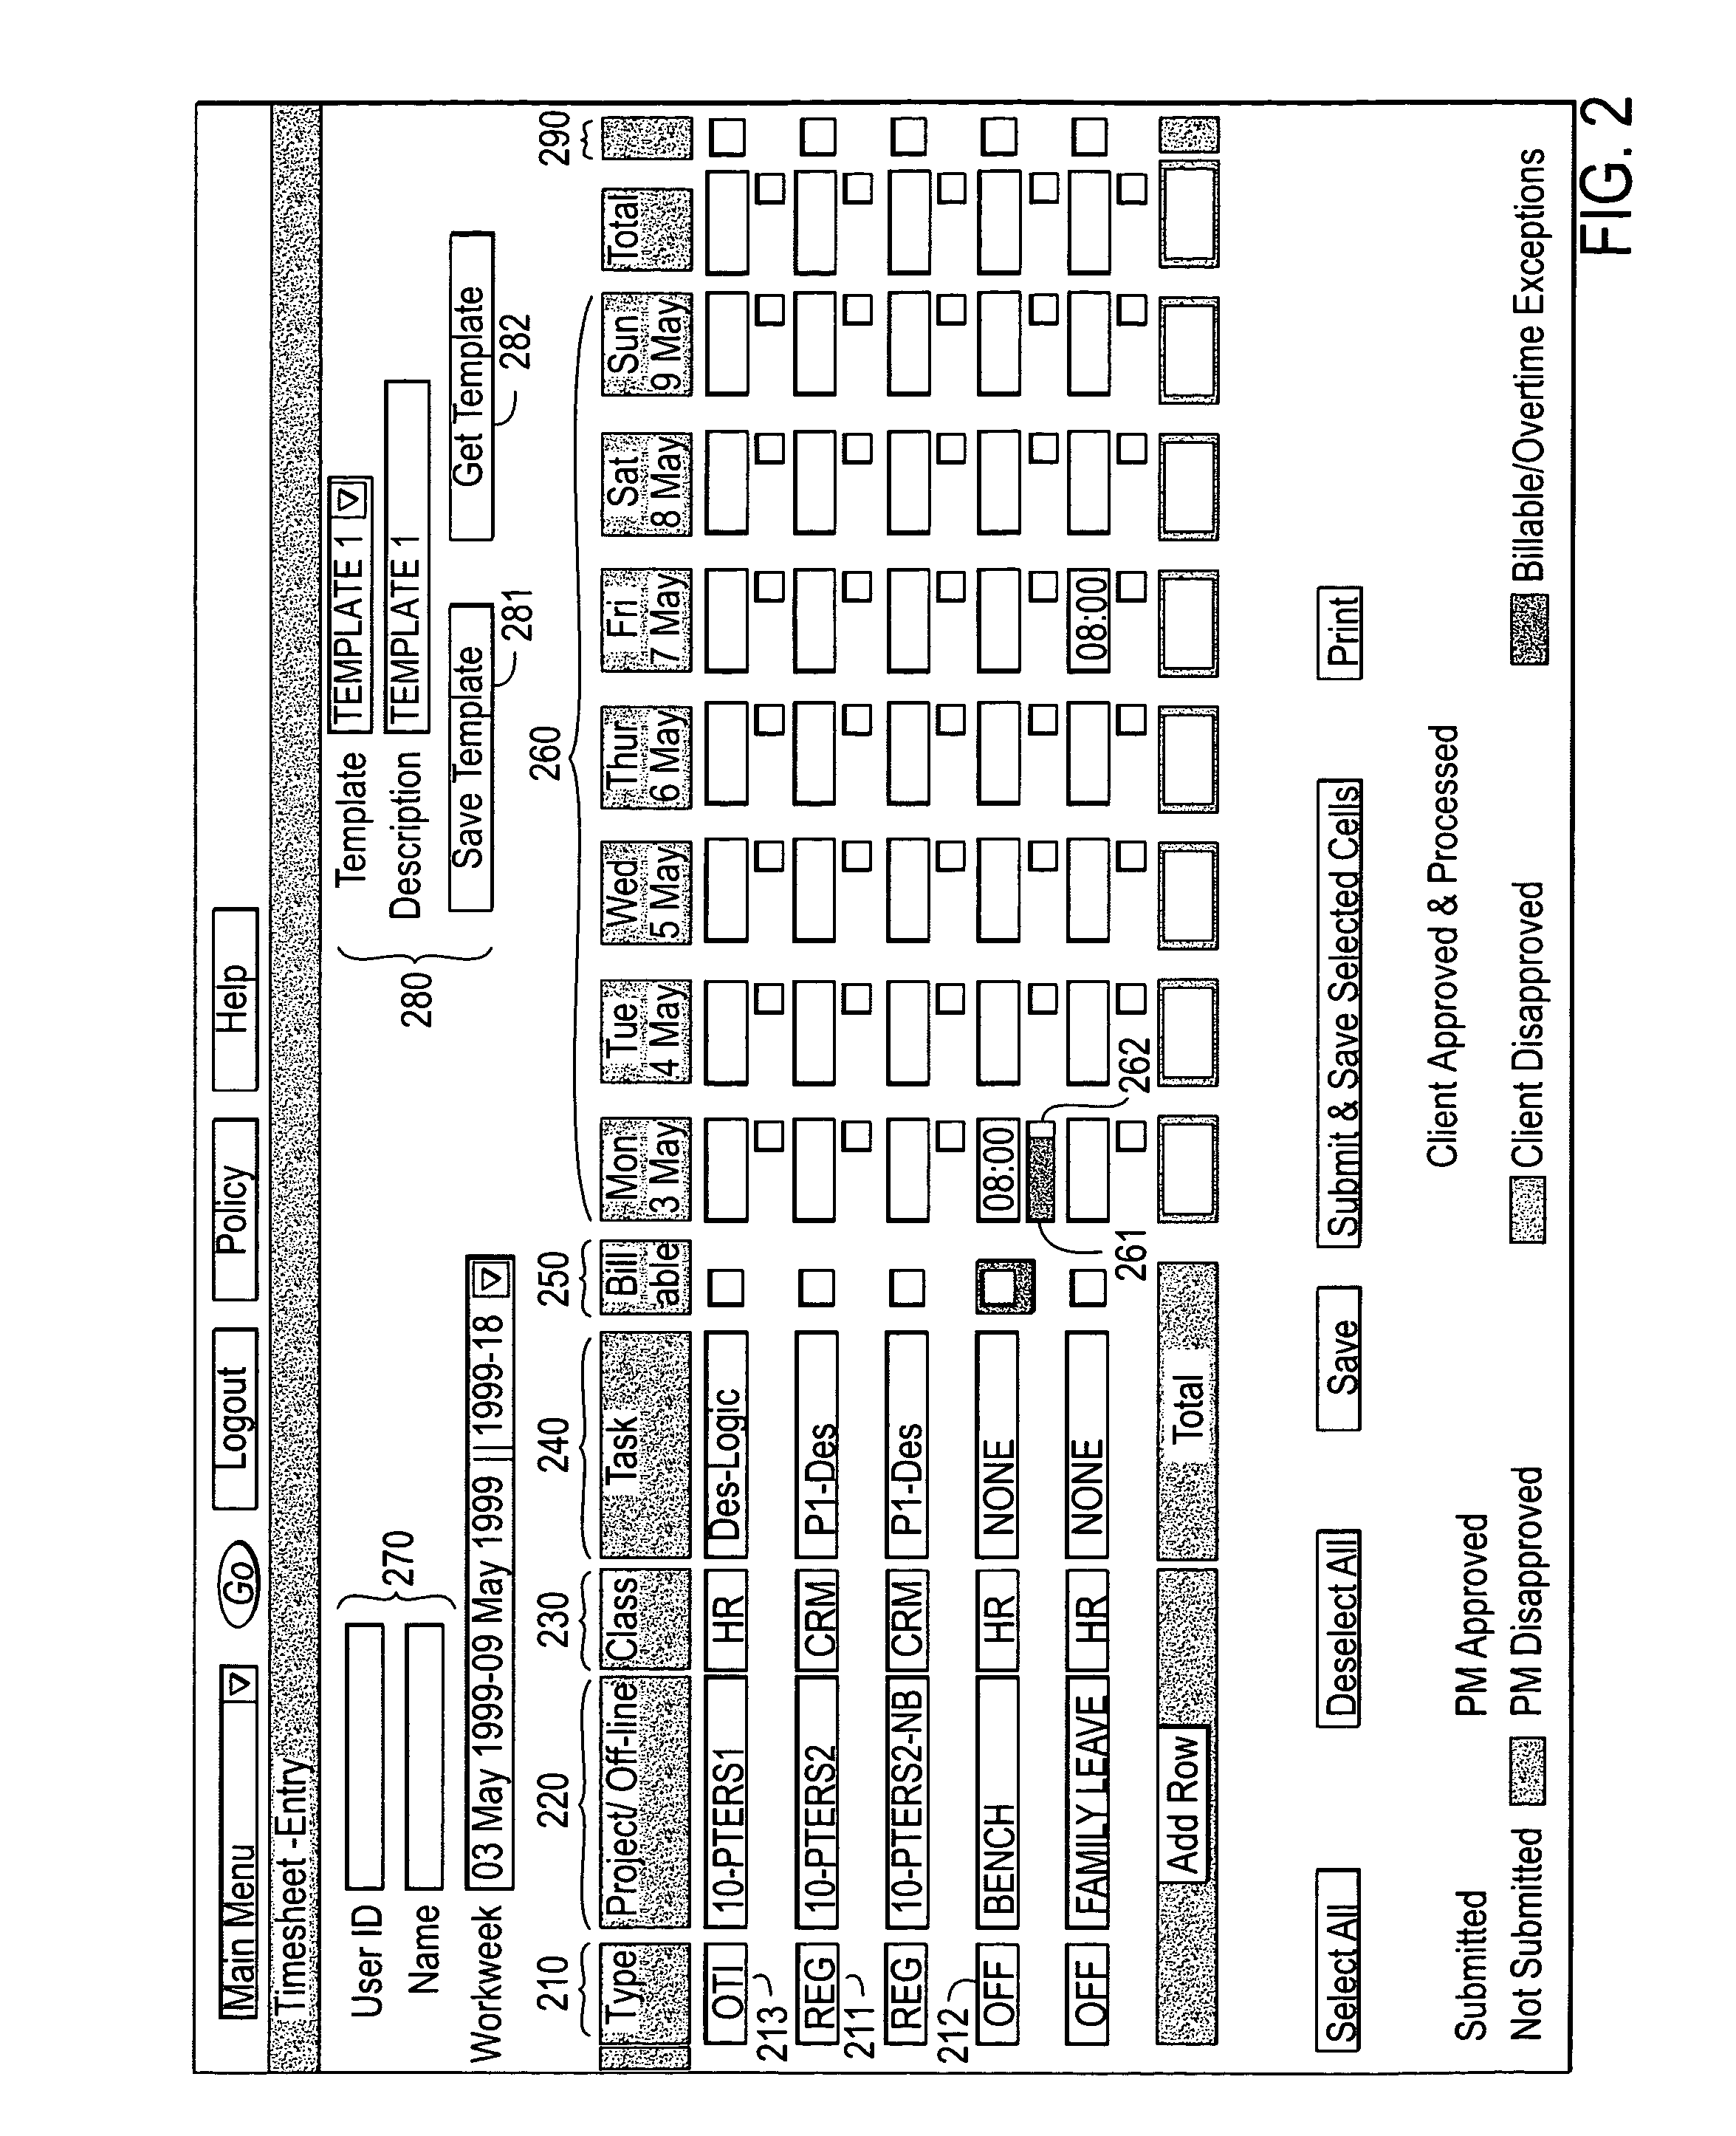 Method and system for computer aided management of time & financial data